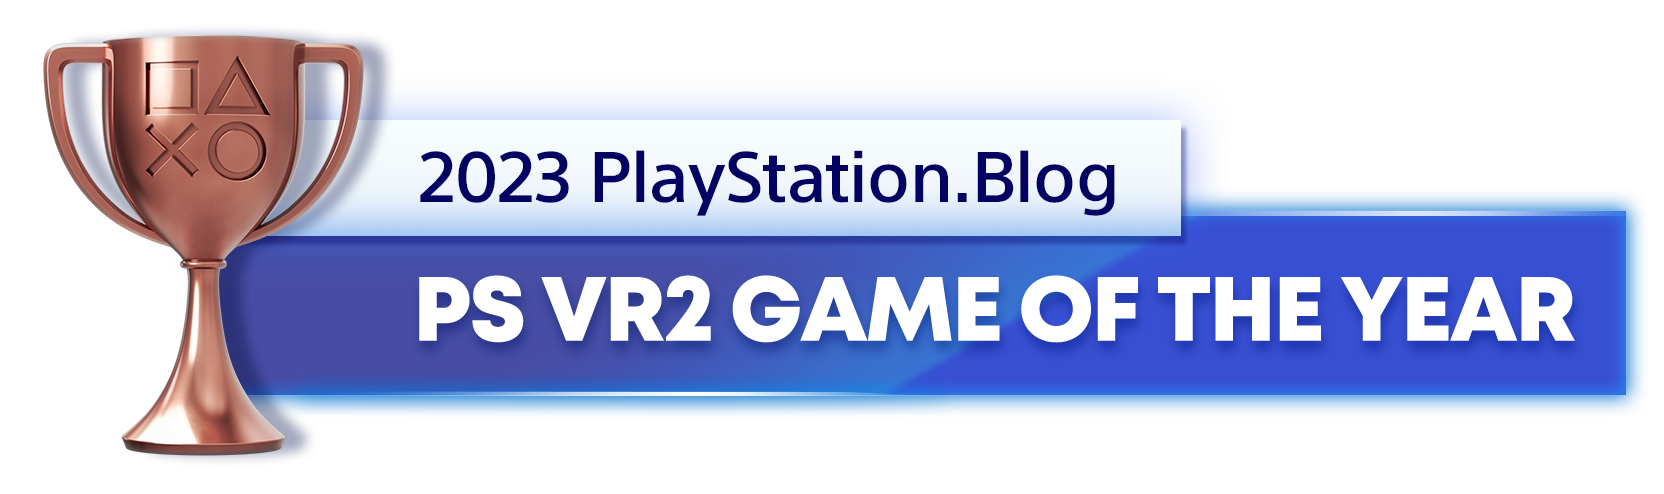  "Bronze Trophy for the 2023 PlayStation Blog PS VR2 Game of the Year Winner"